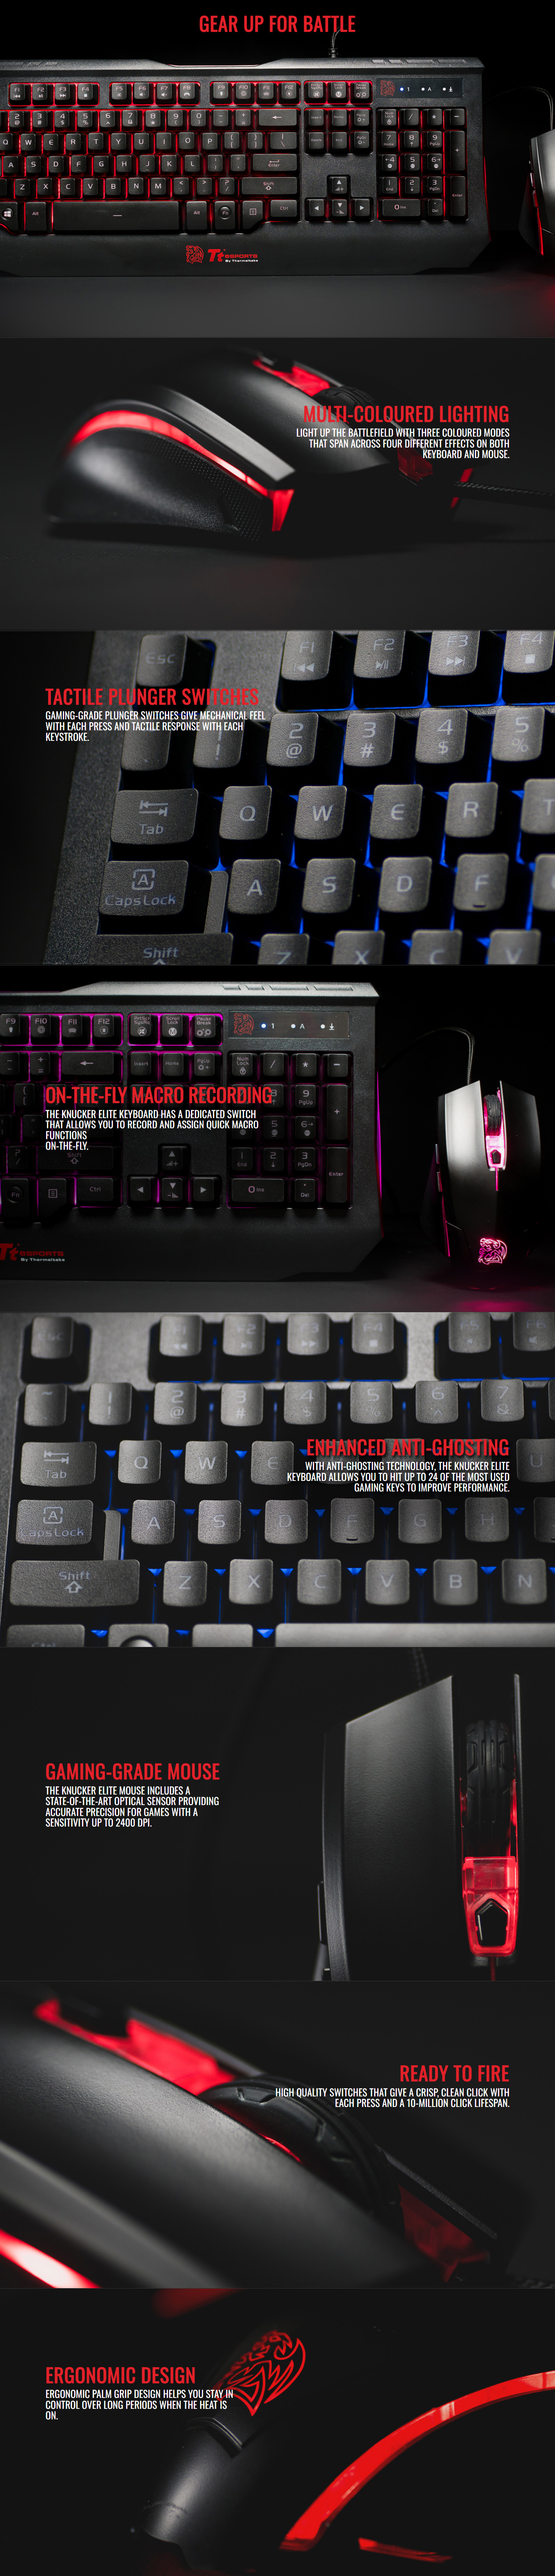 Keyboards-Thermaltake-Knucker-Elite-Gaming-Keyboard-and-Mouse-Combo-1